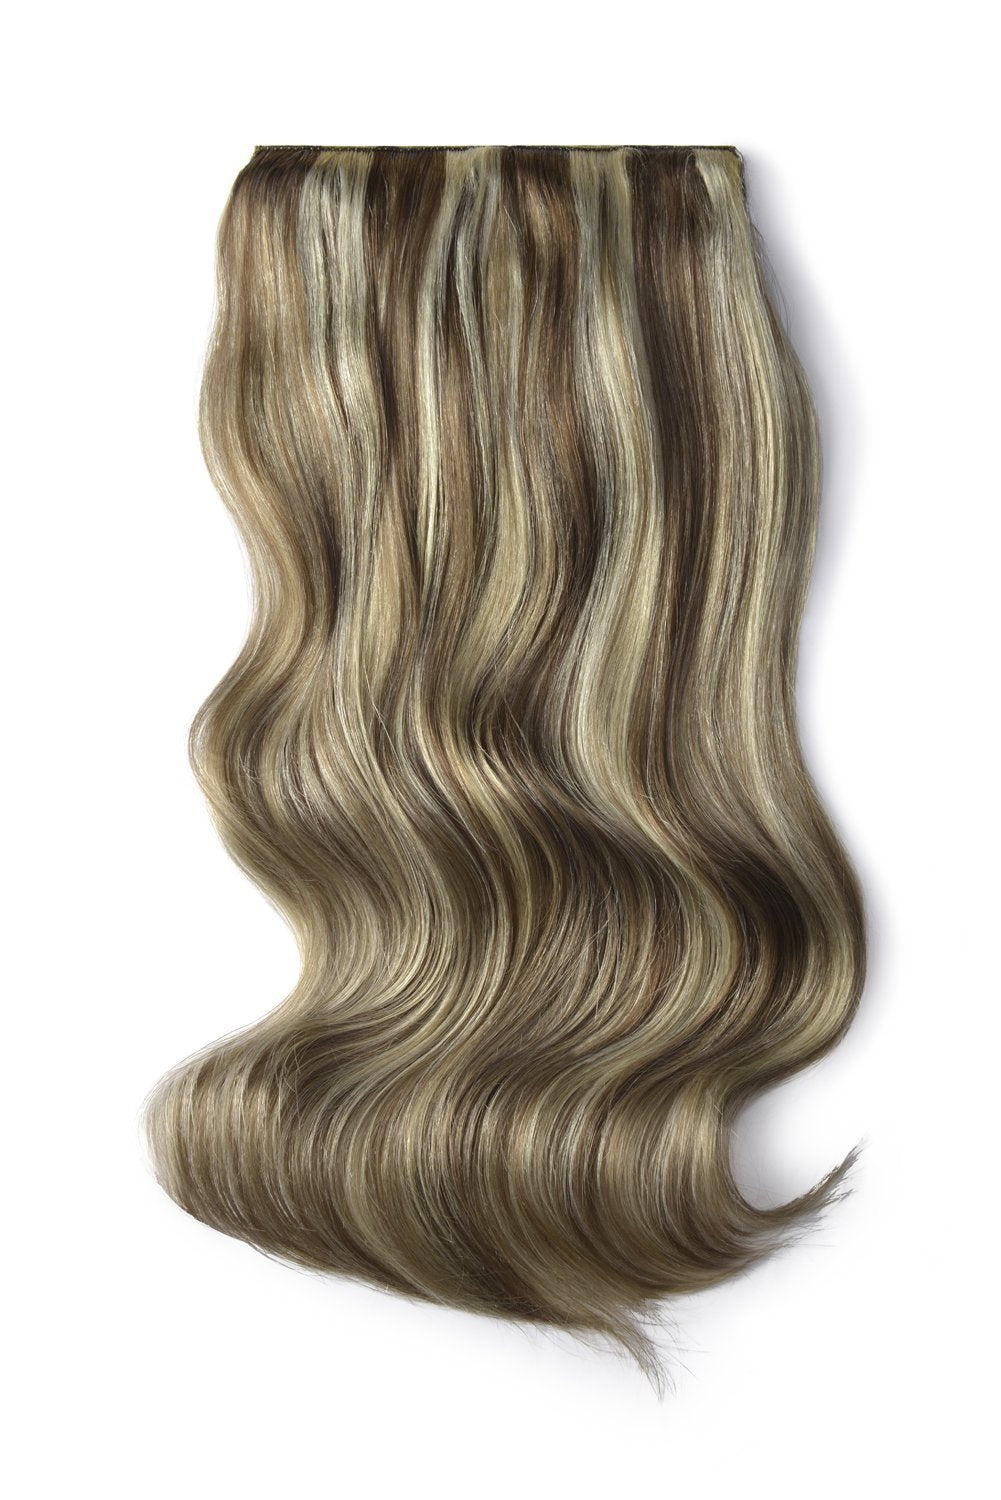 Double Wefted Full Head Remy Clip in Human Hair Extensions - Ash Brown/Bleach Blonde Mix (#9/613)